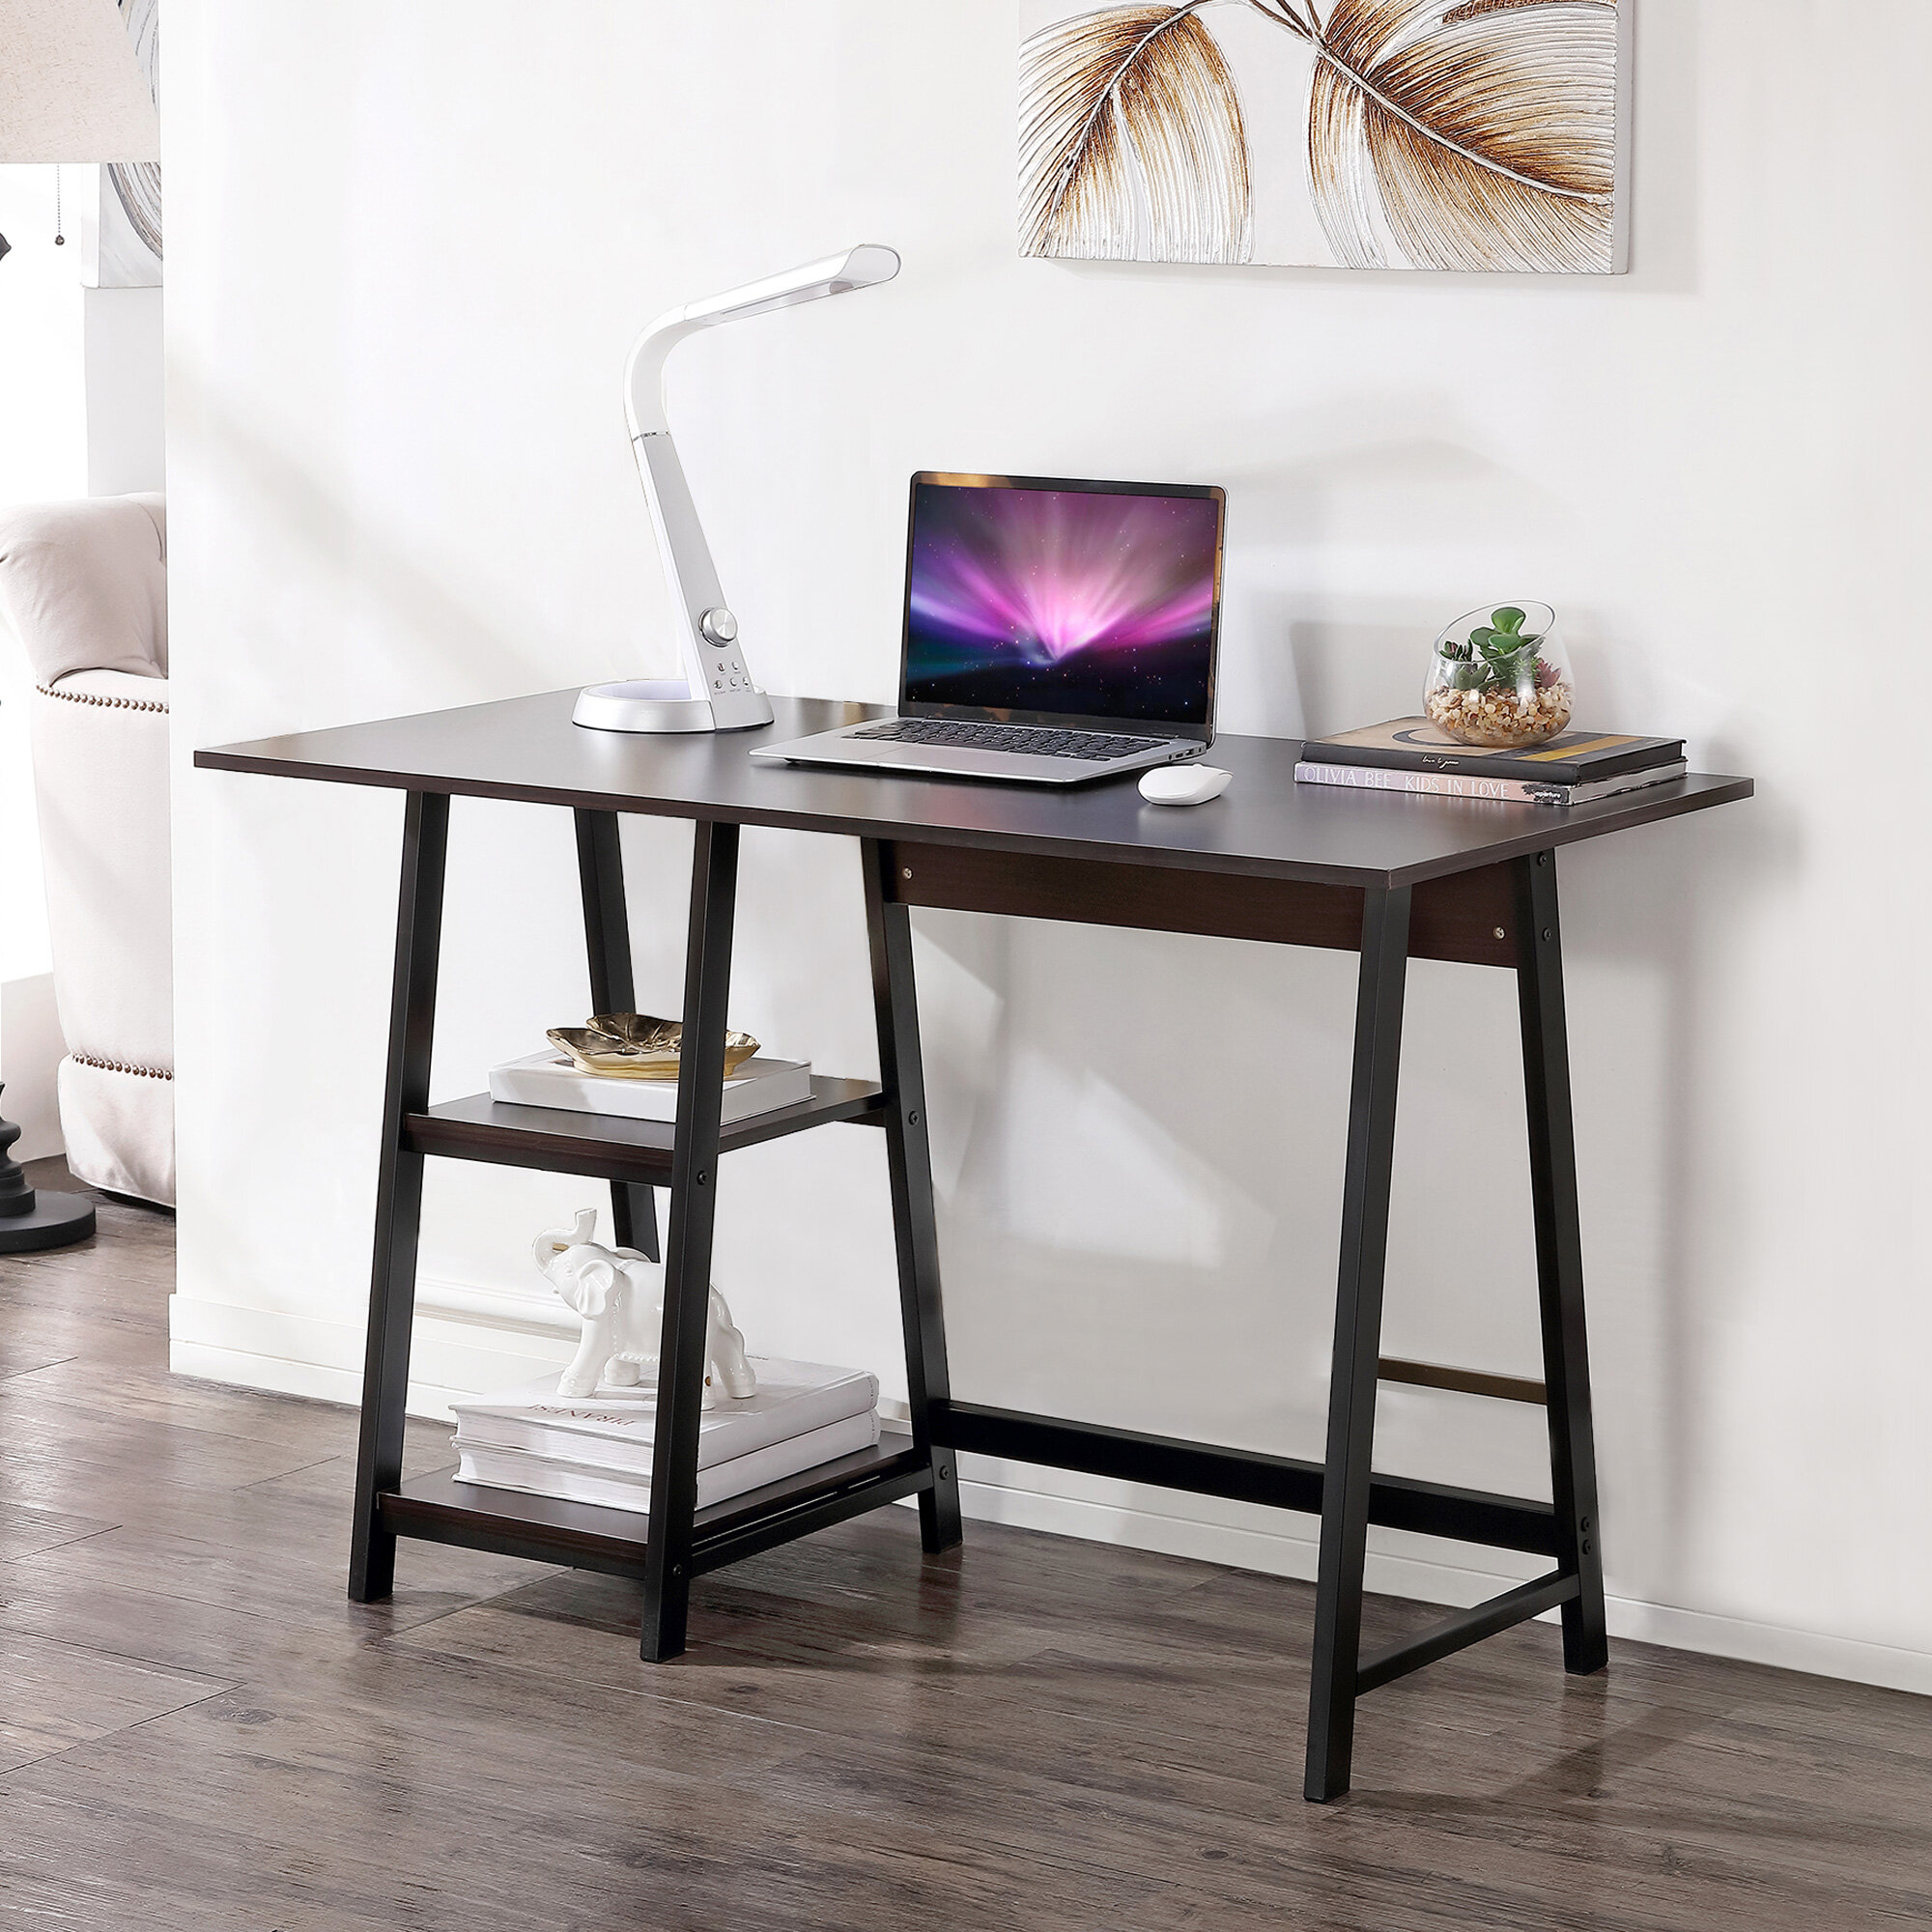 BestOffice Computer Desk472 Inches Home Office Desk Writing Study Table Modern Simple Style PC Desk with Metal Framebrown, 47 inch